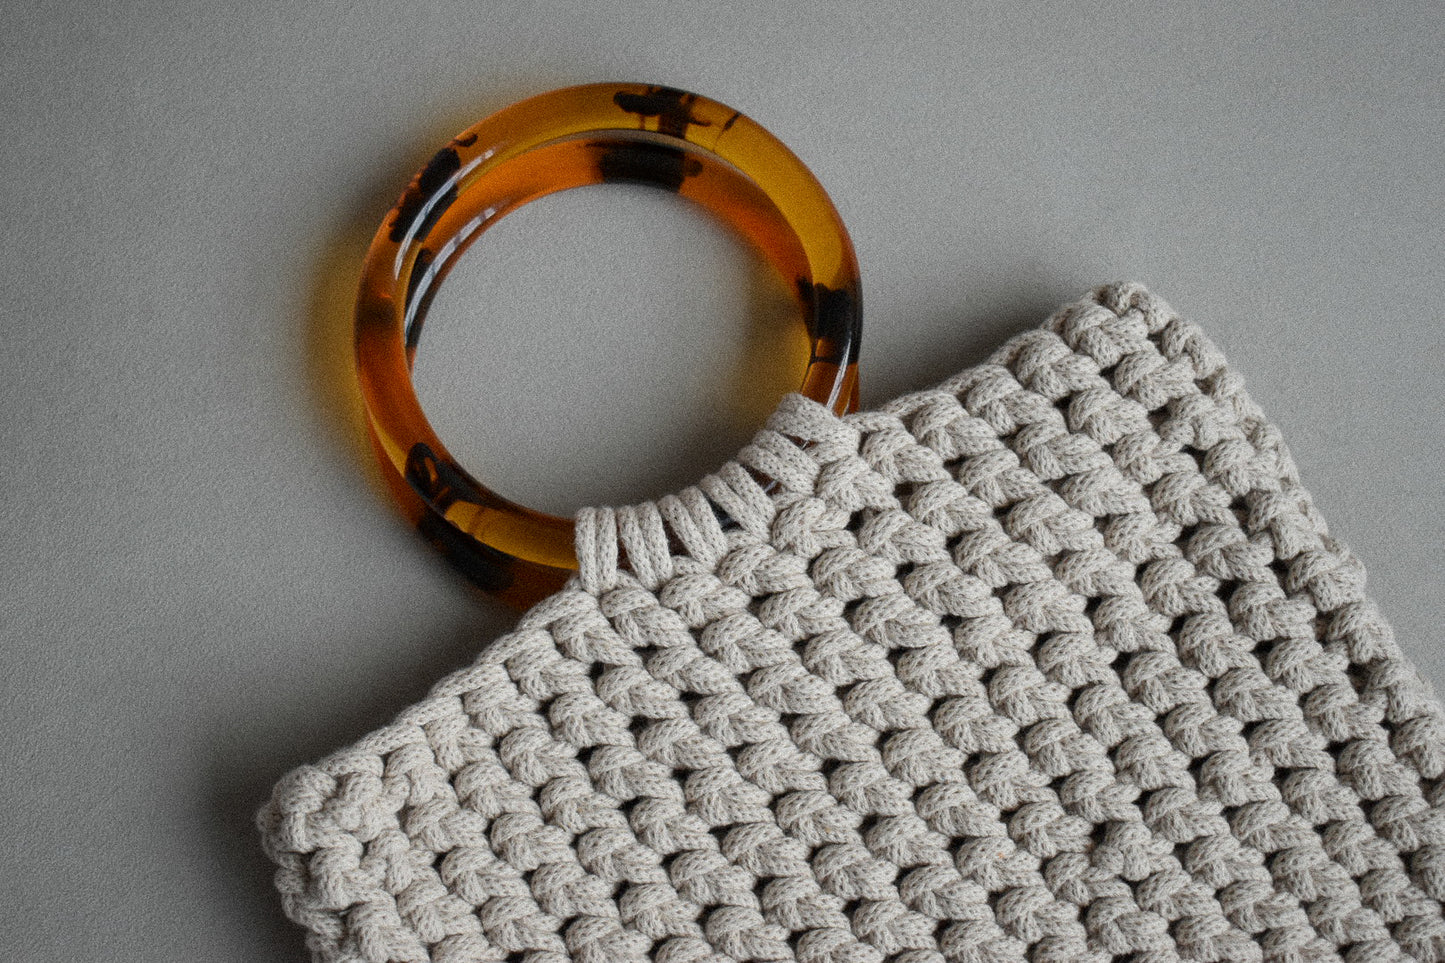 Crocheted hand bag, made with 100% recycled cotton textiles